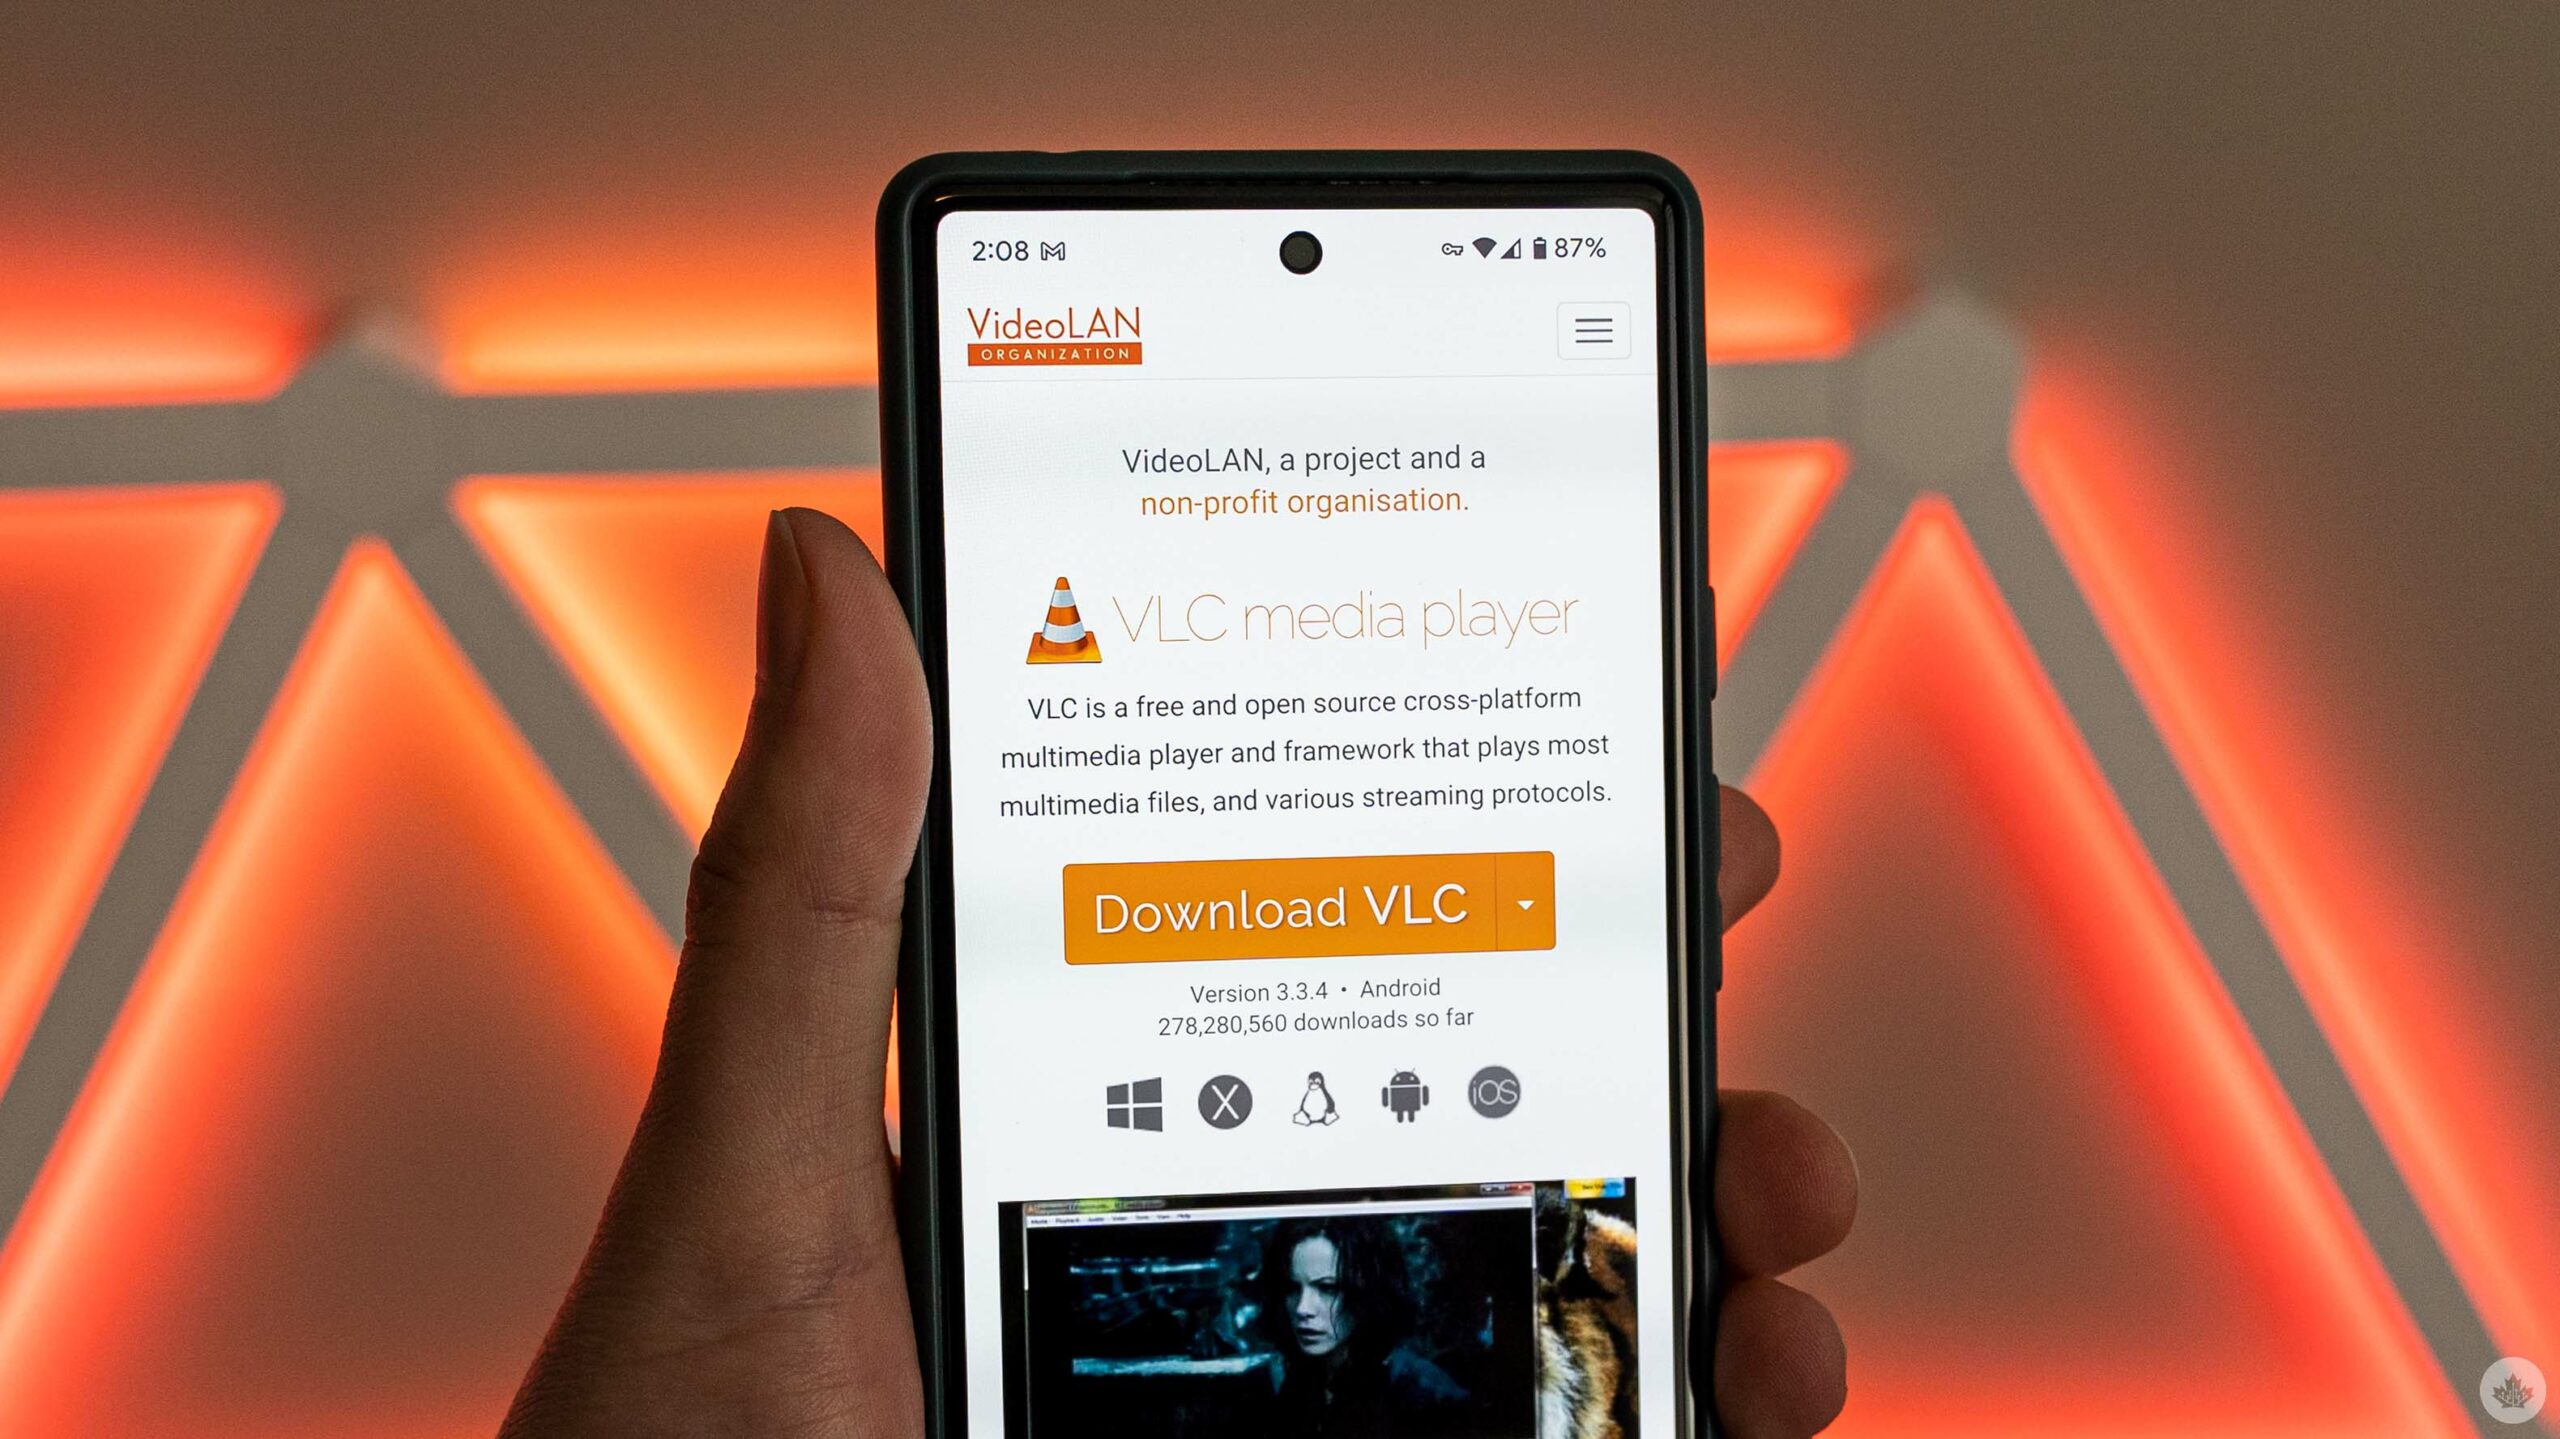 VLC website on a smartphone